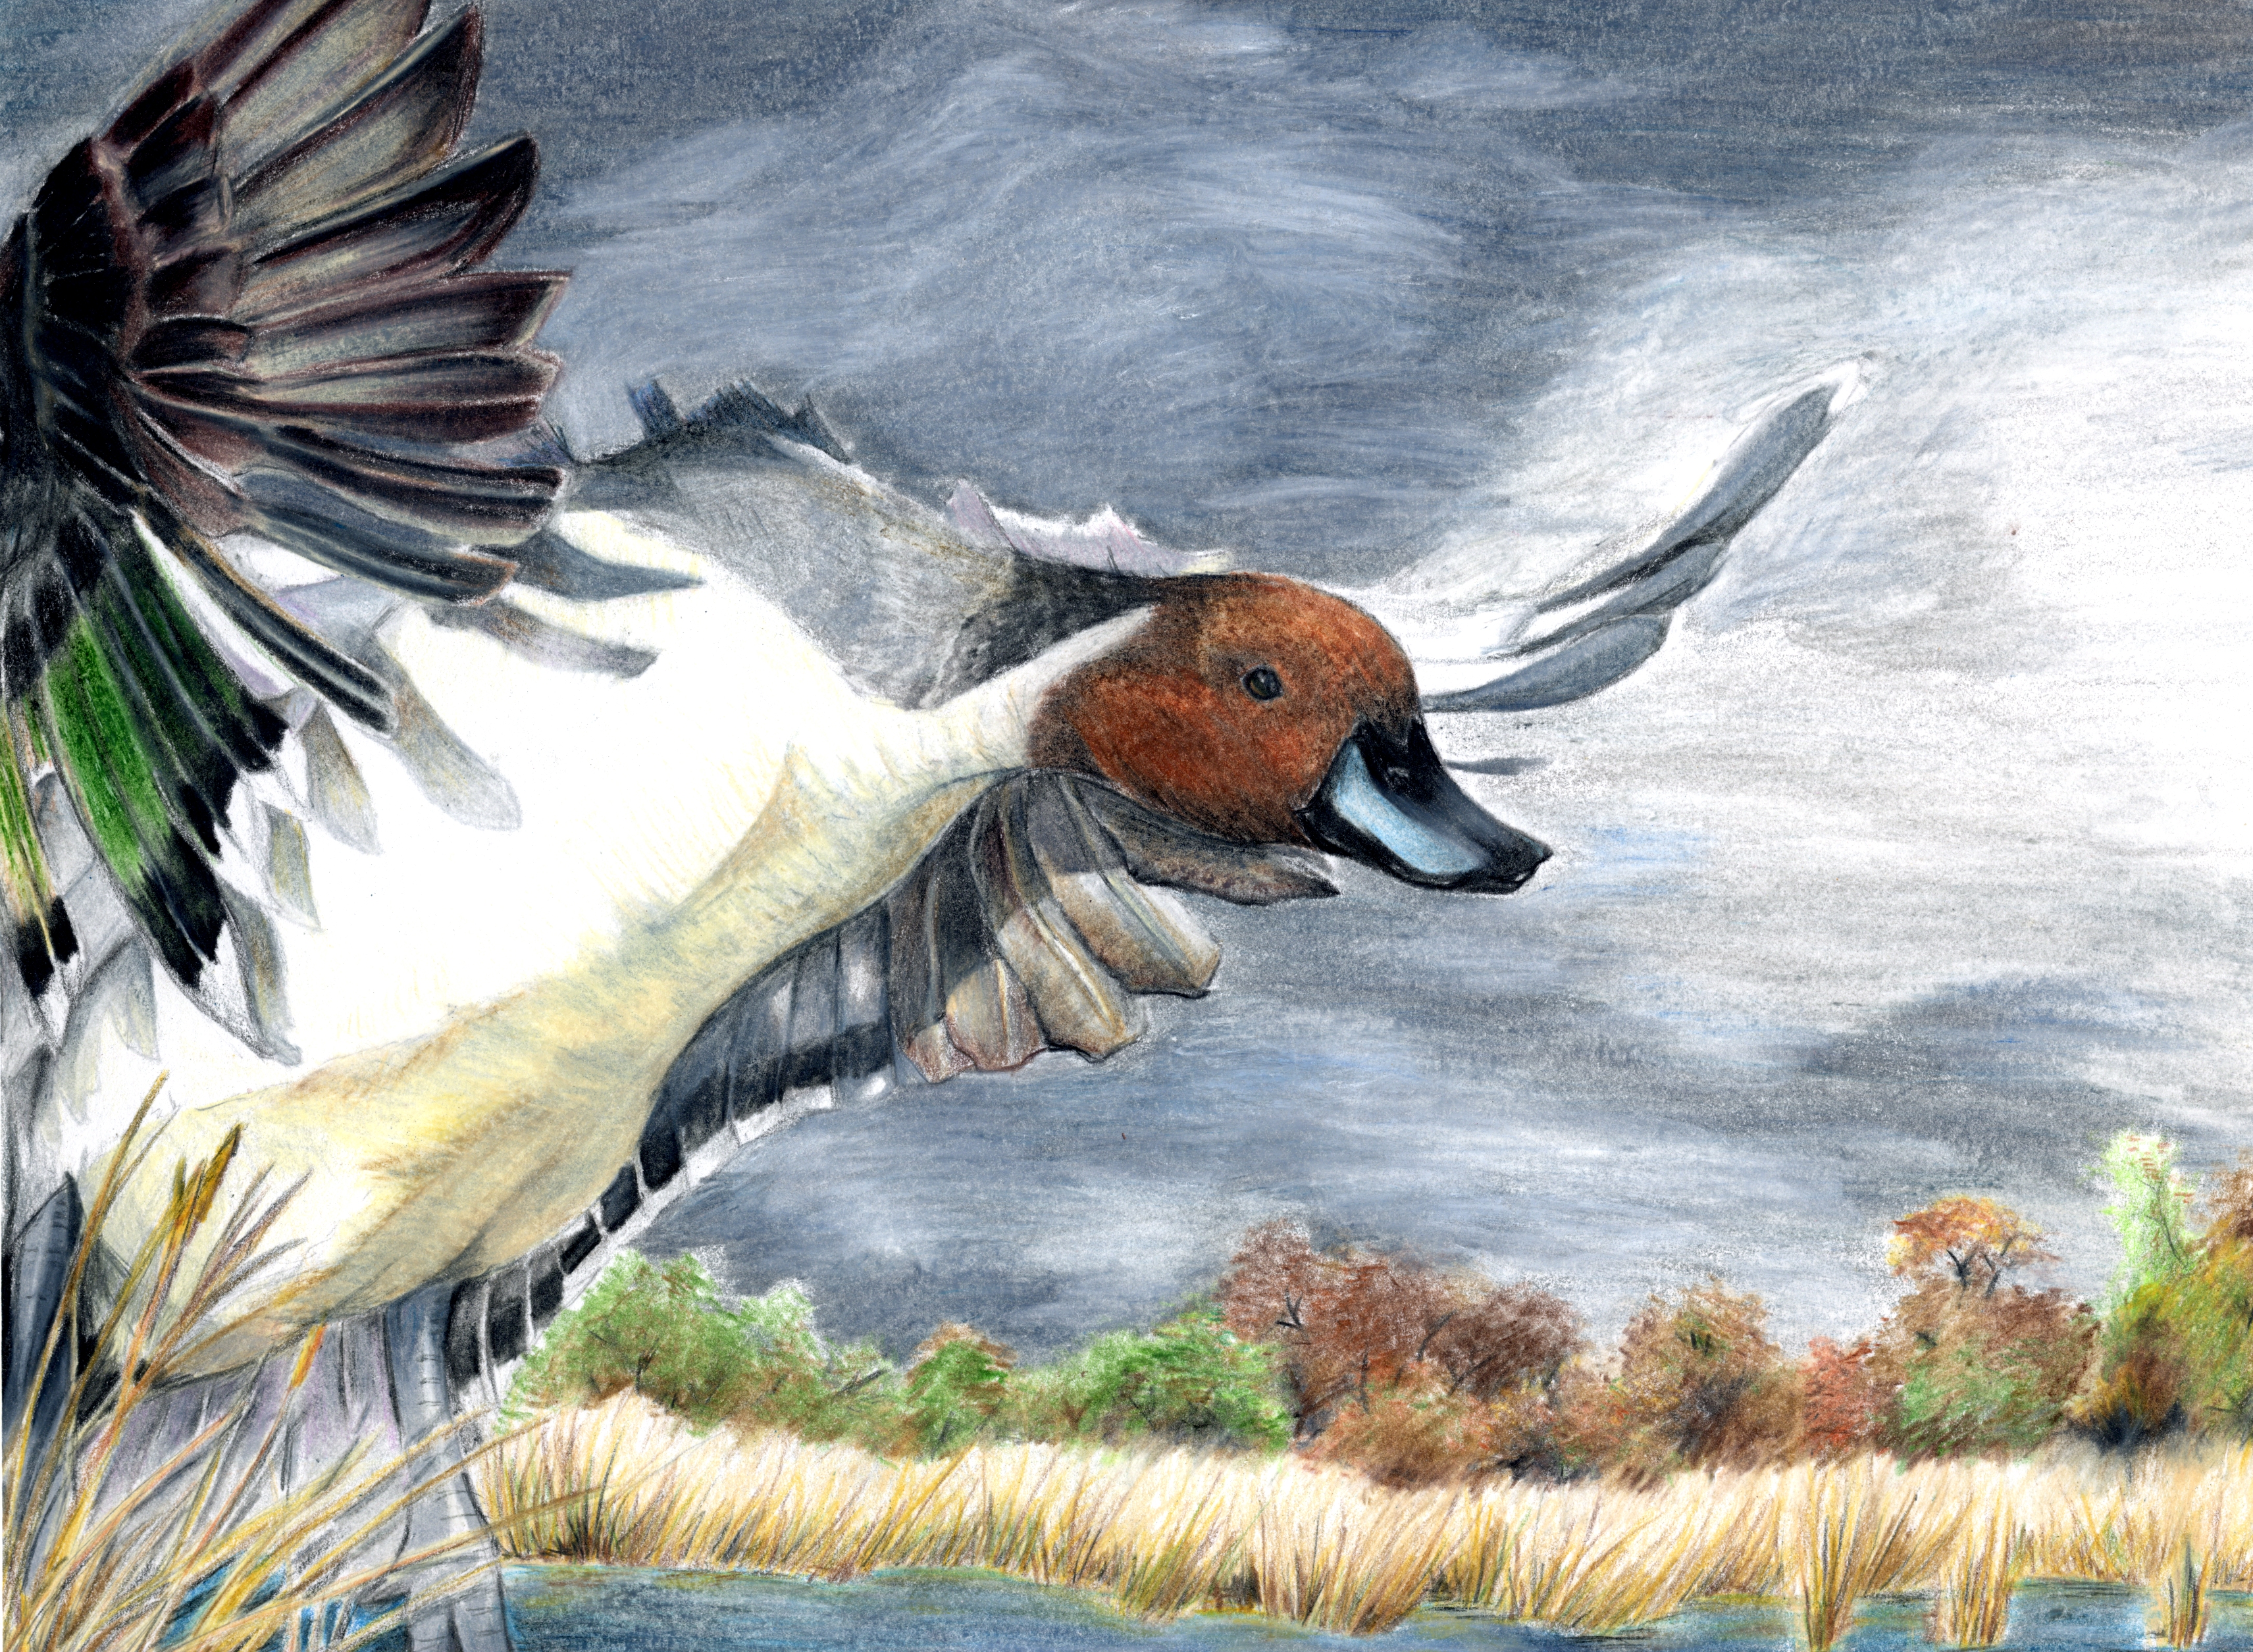 The finalist from North Carolina for the 2011 Junior Duck Stamp Art Contest. (5610368376)